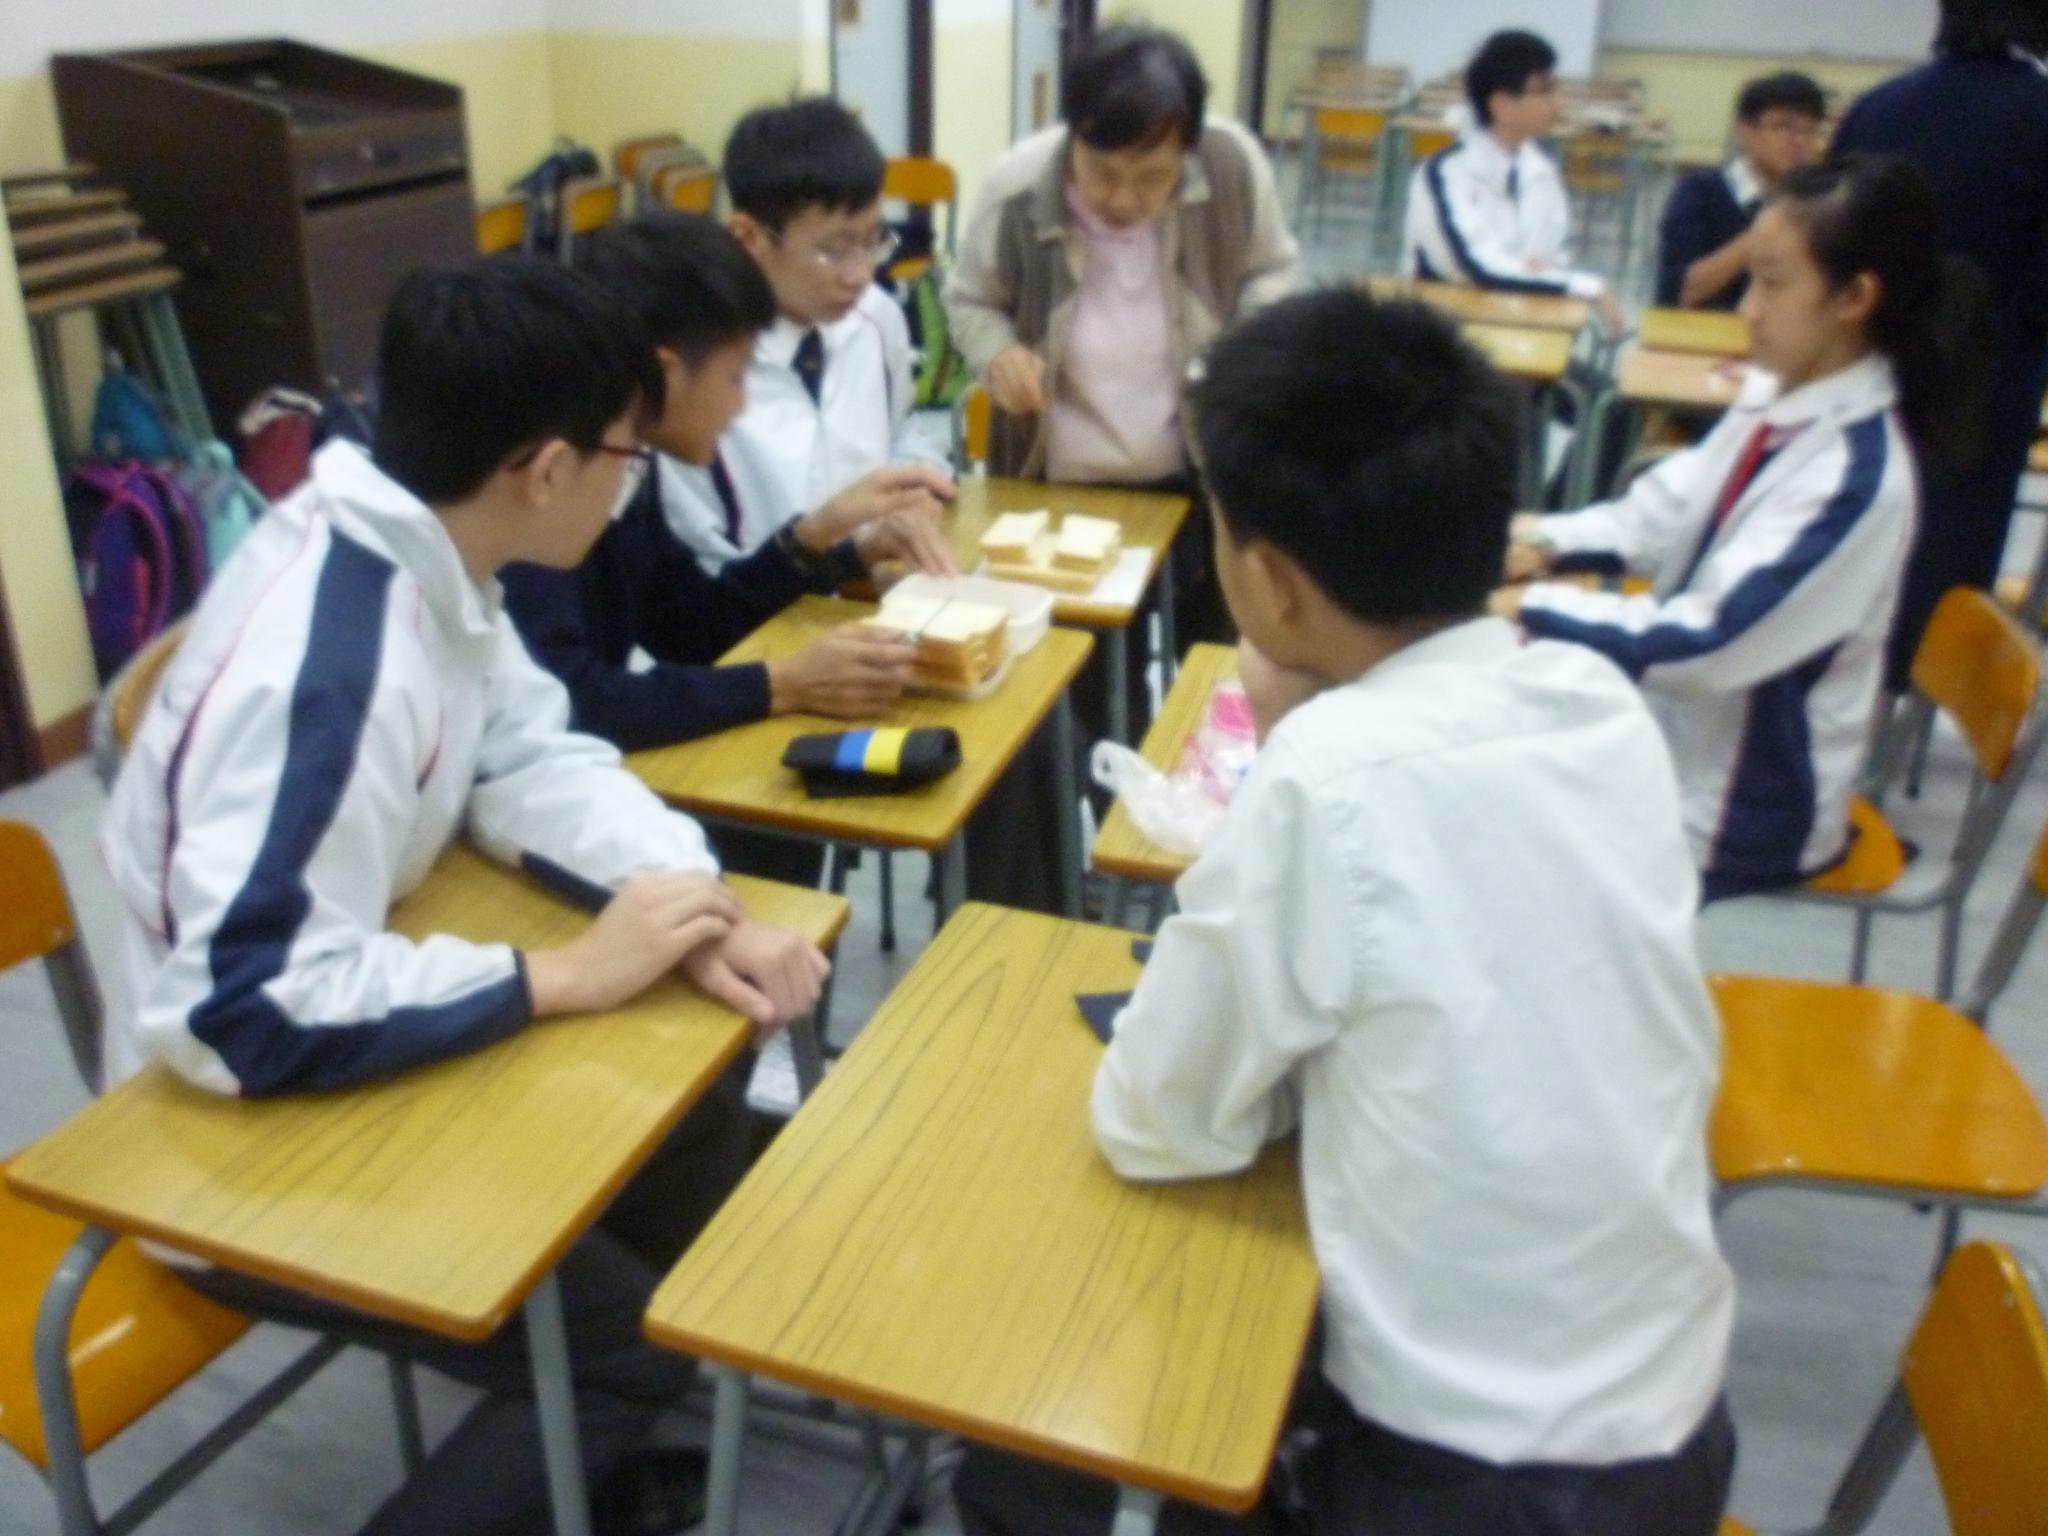 Students prepared different kind of food for the elderly.